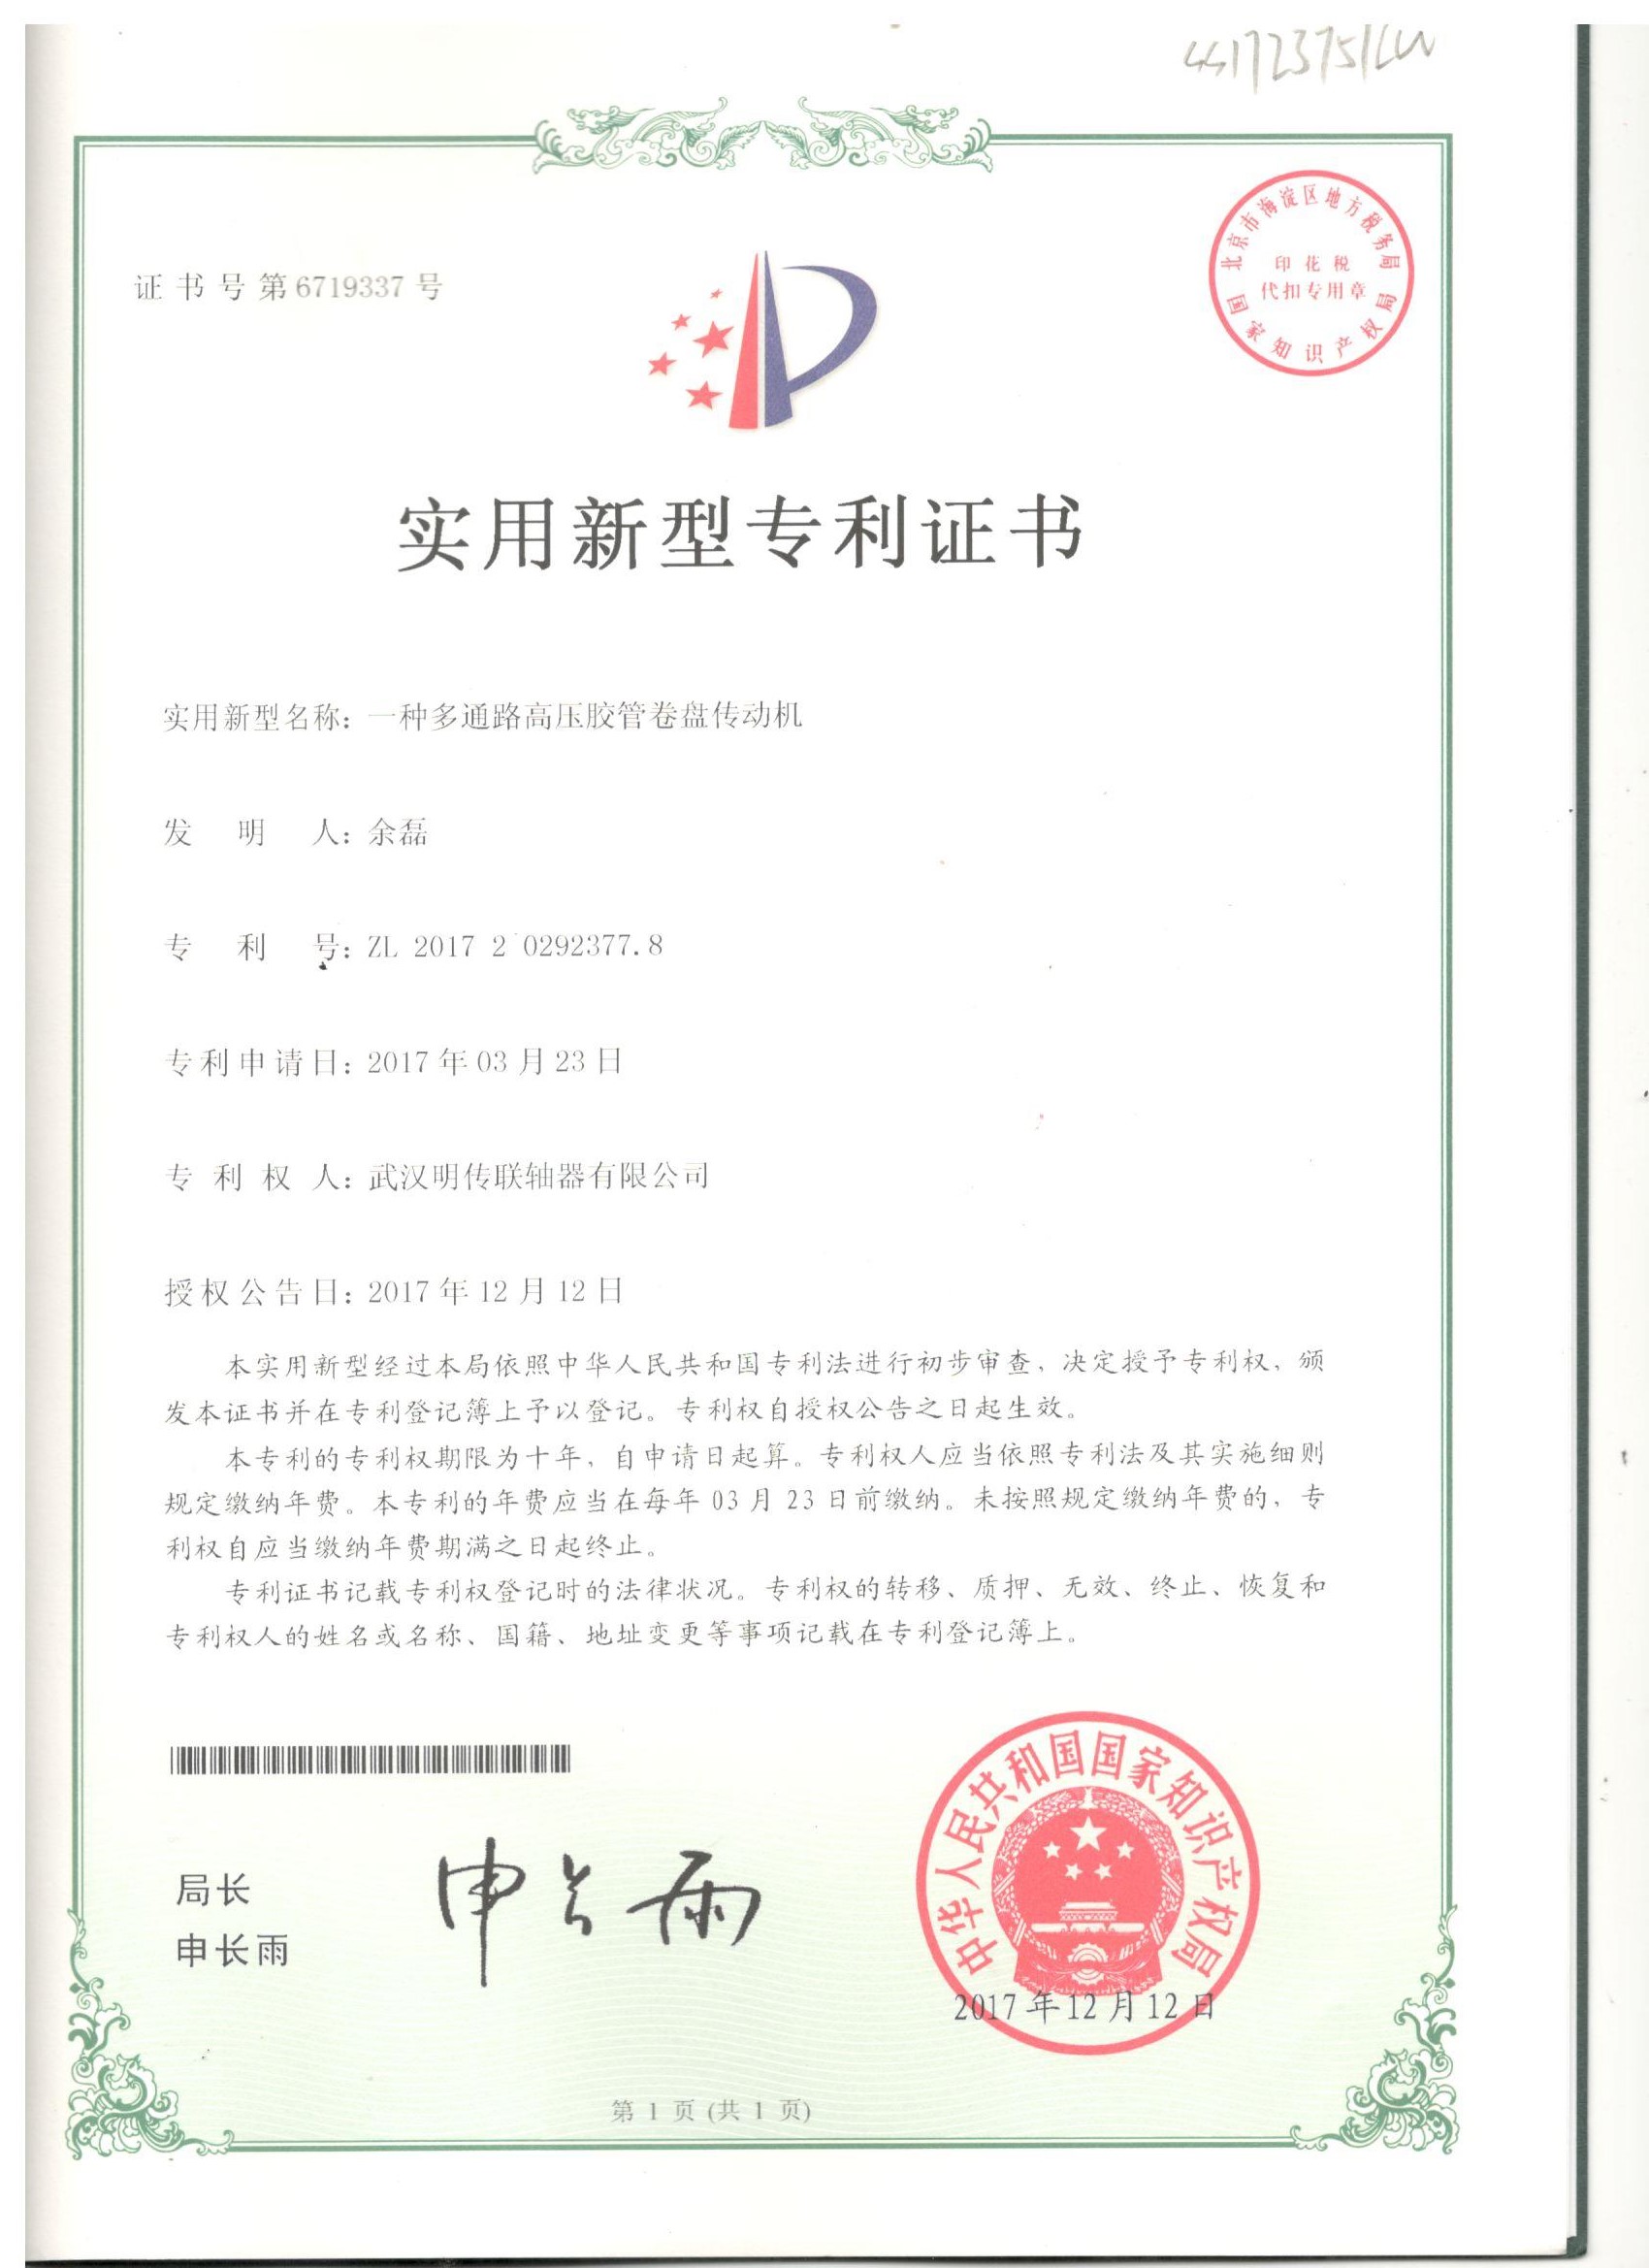 EP Coupling Co., Ltd. hydraulic reel products won patent certificate